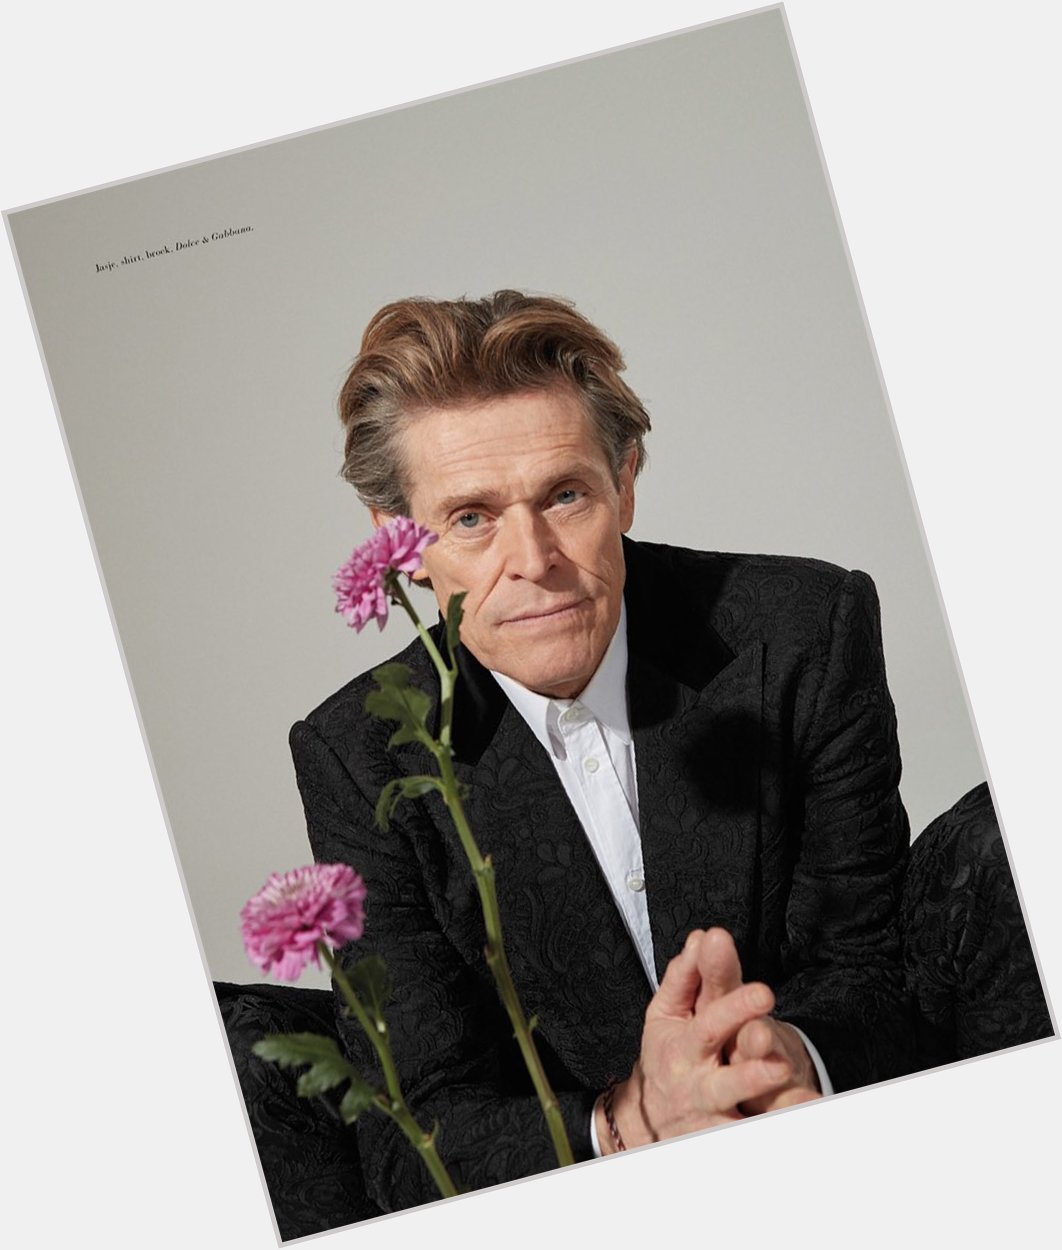 Happy Birthday to the most exciting and inspiring actor I ve ever seen on the big screen: Willem Dafoe 